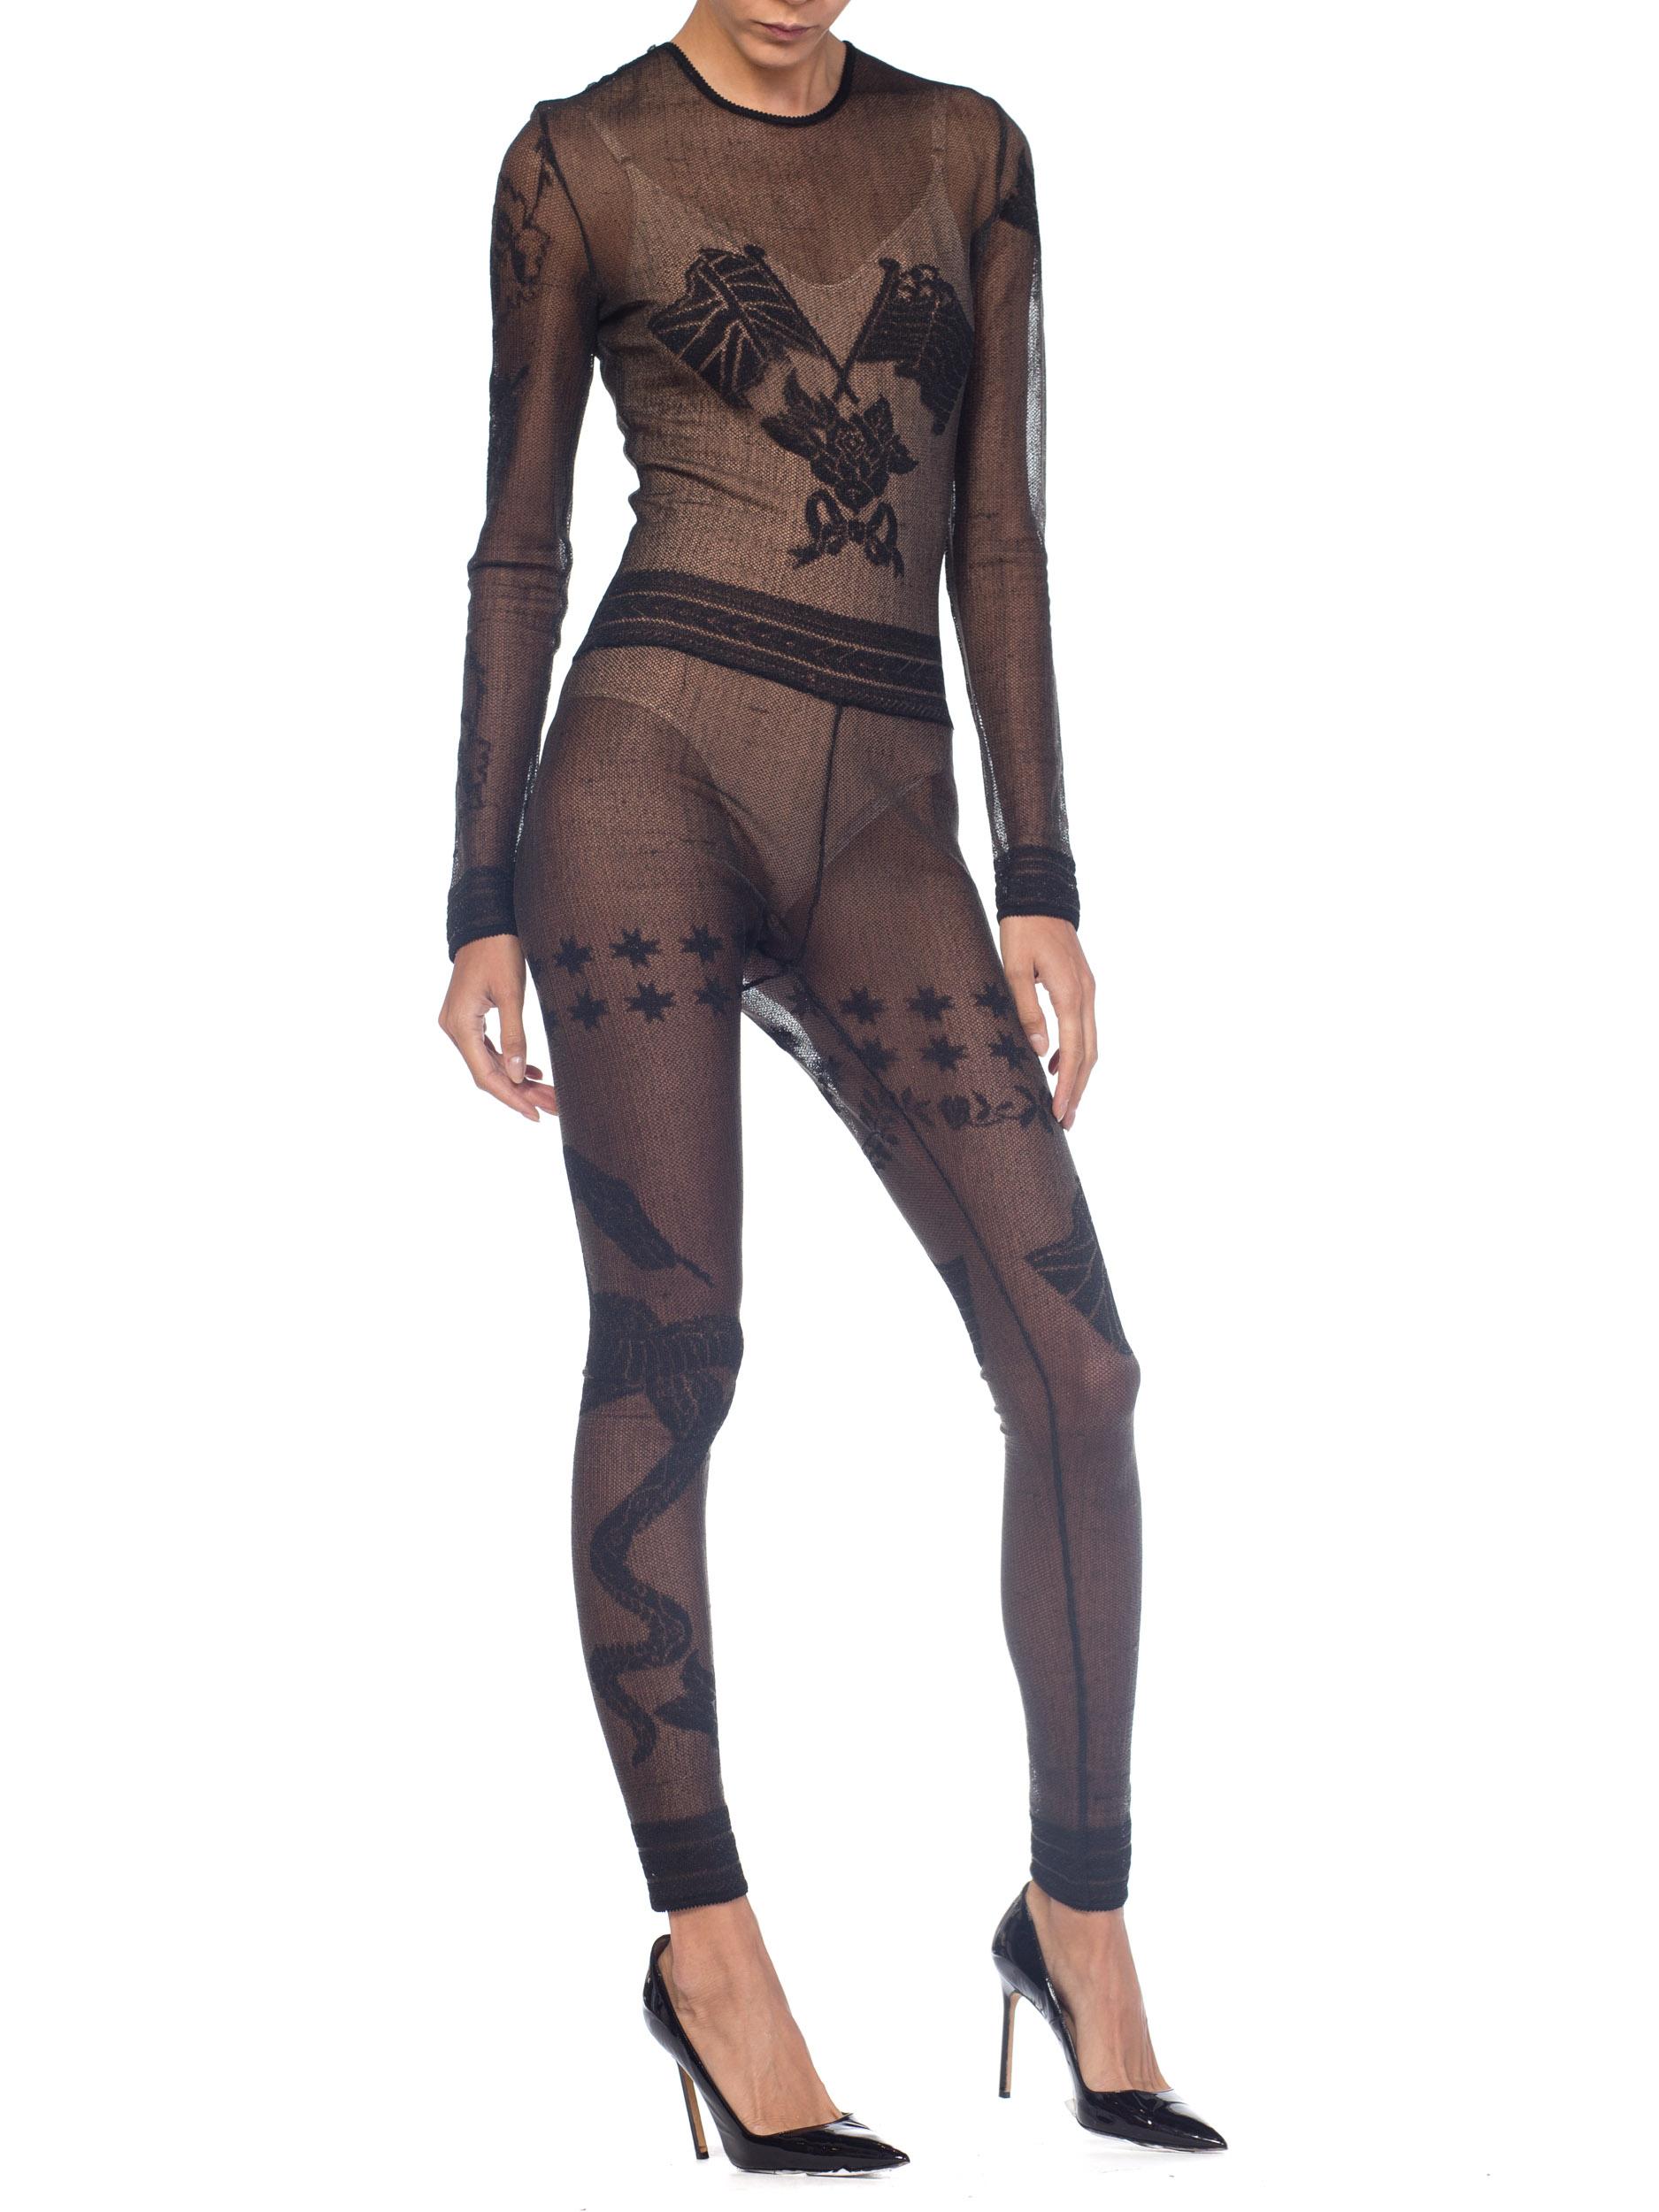 1990S JOHN GALLIANO Sheer Knit Bodysuit Jumpsuit From The Siouxsie Sphinx Colle 1